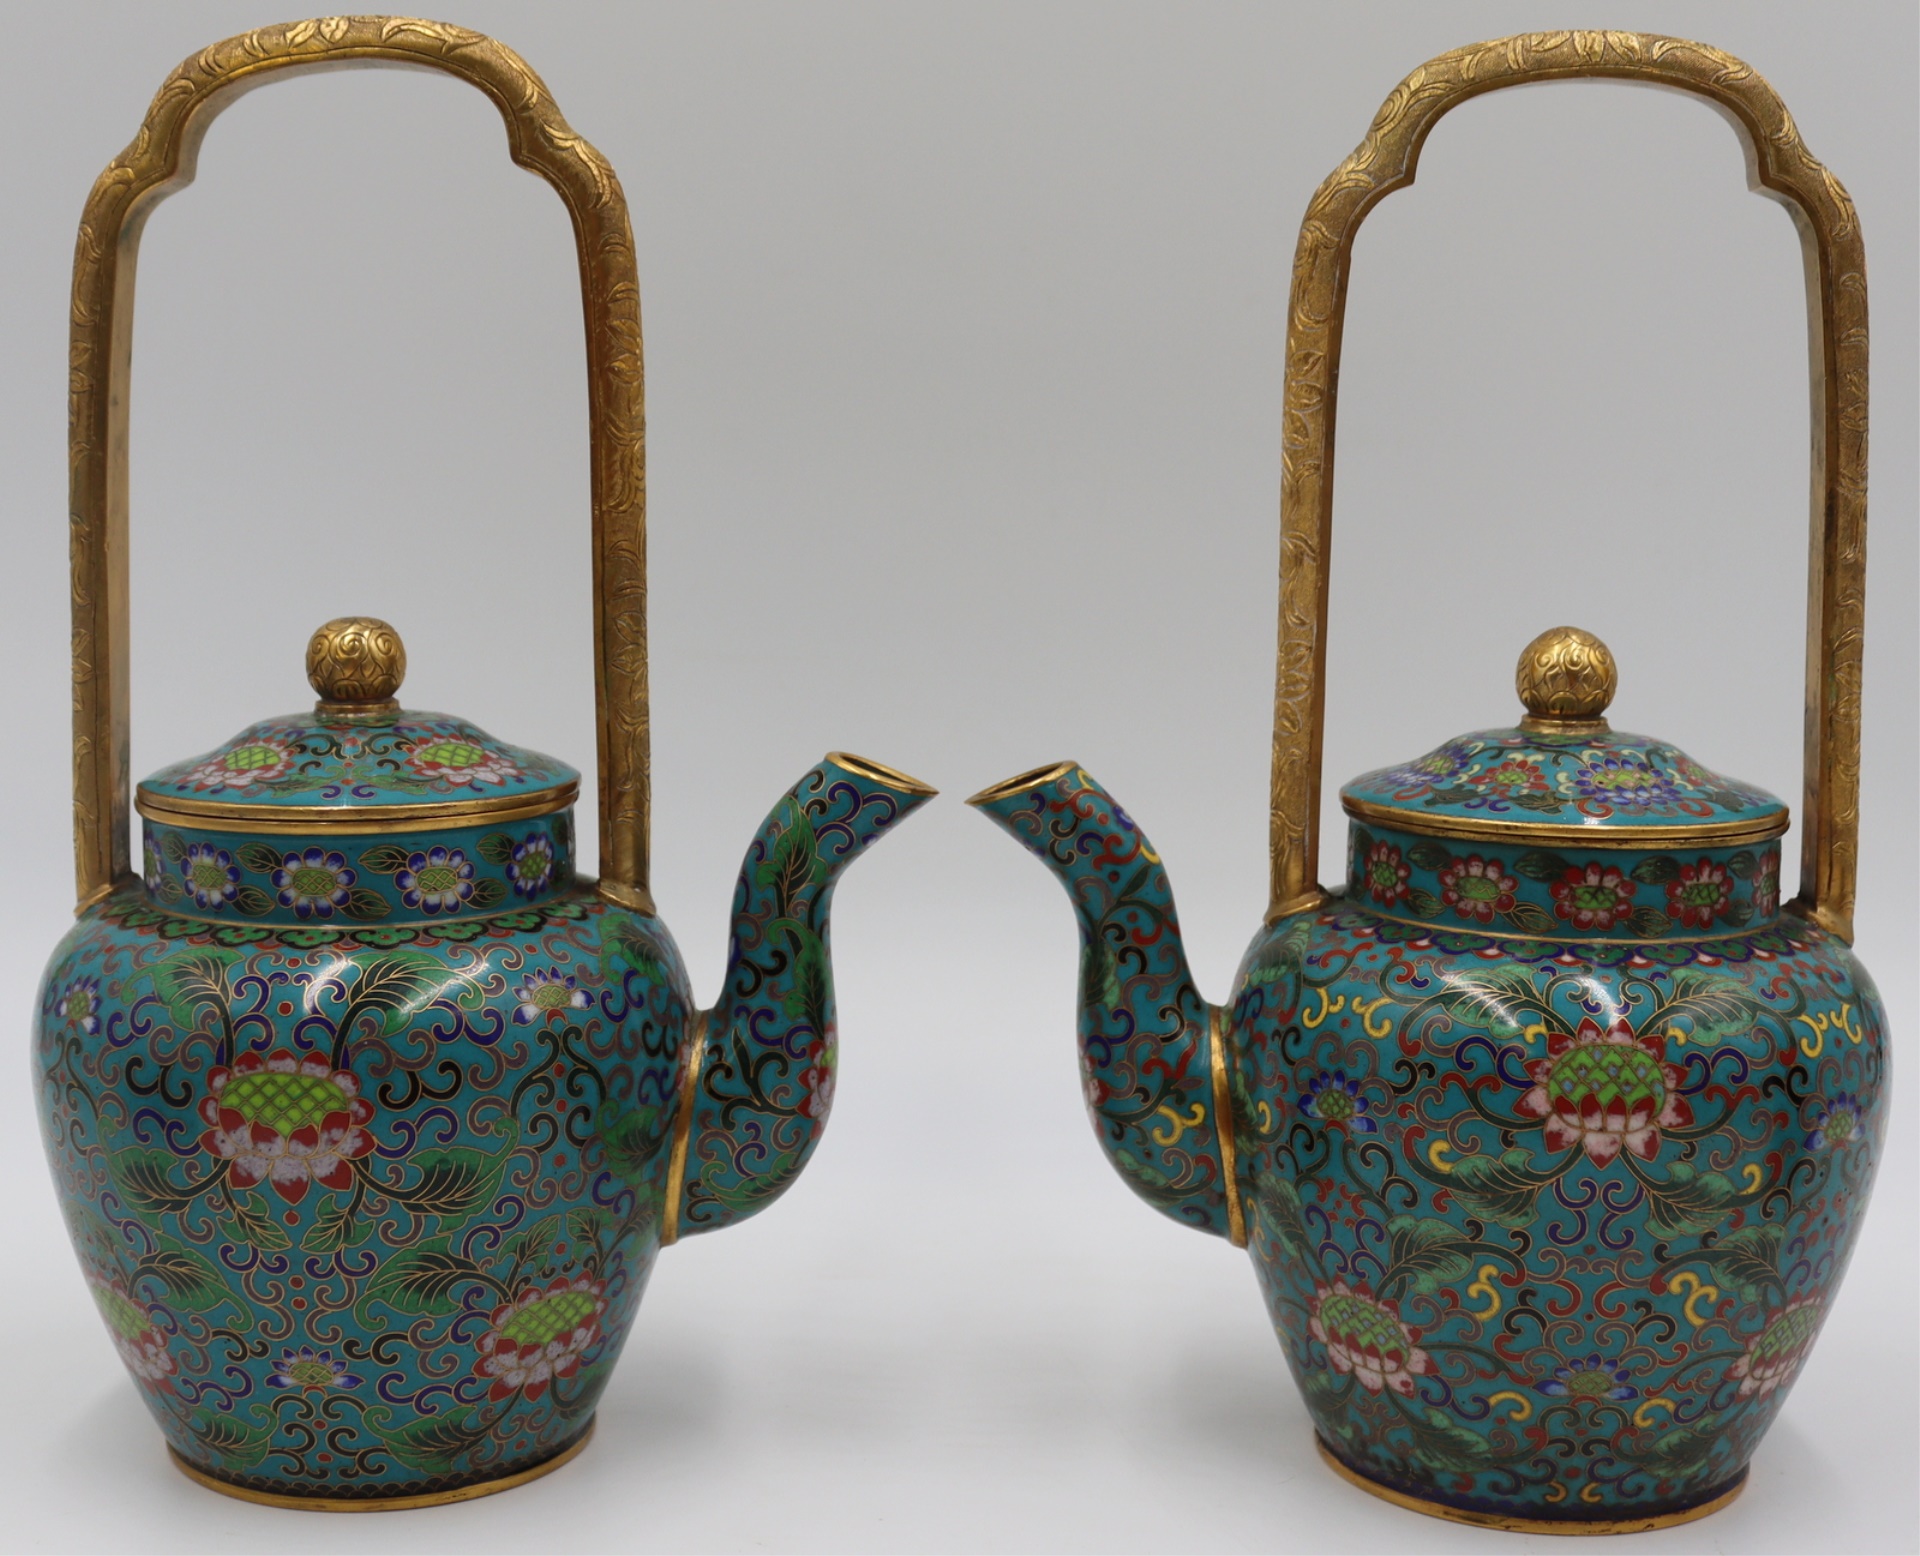 PAIR OF CHINESE CLOISONNE AND GILT